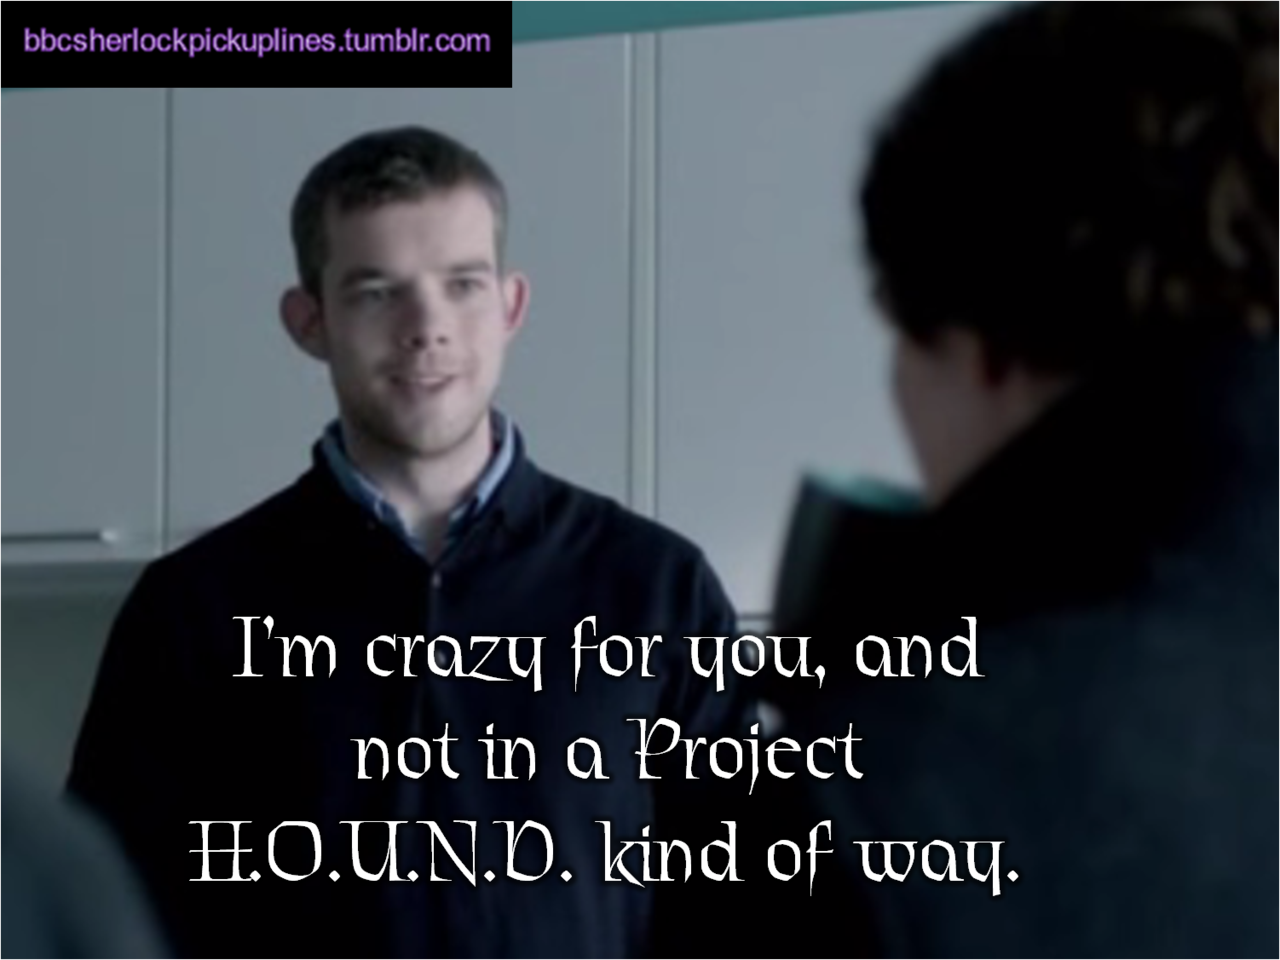 &ldquo;I&rsquo;m crazy for you, and not in a Project H.O.U.N.D. kind of way.&rdquo;